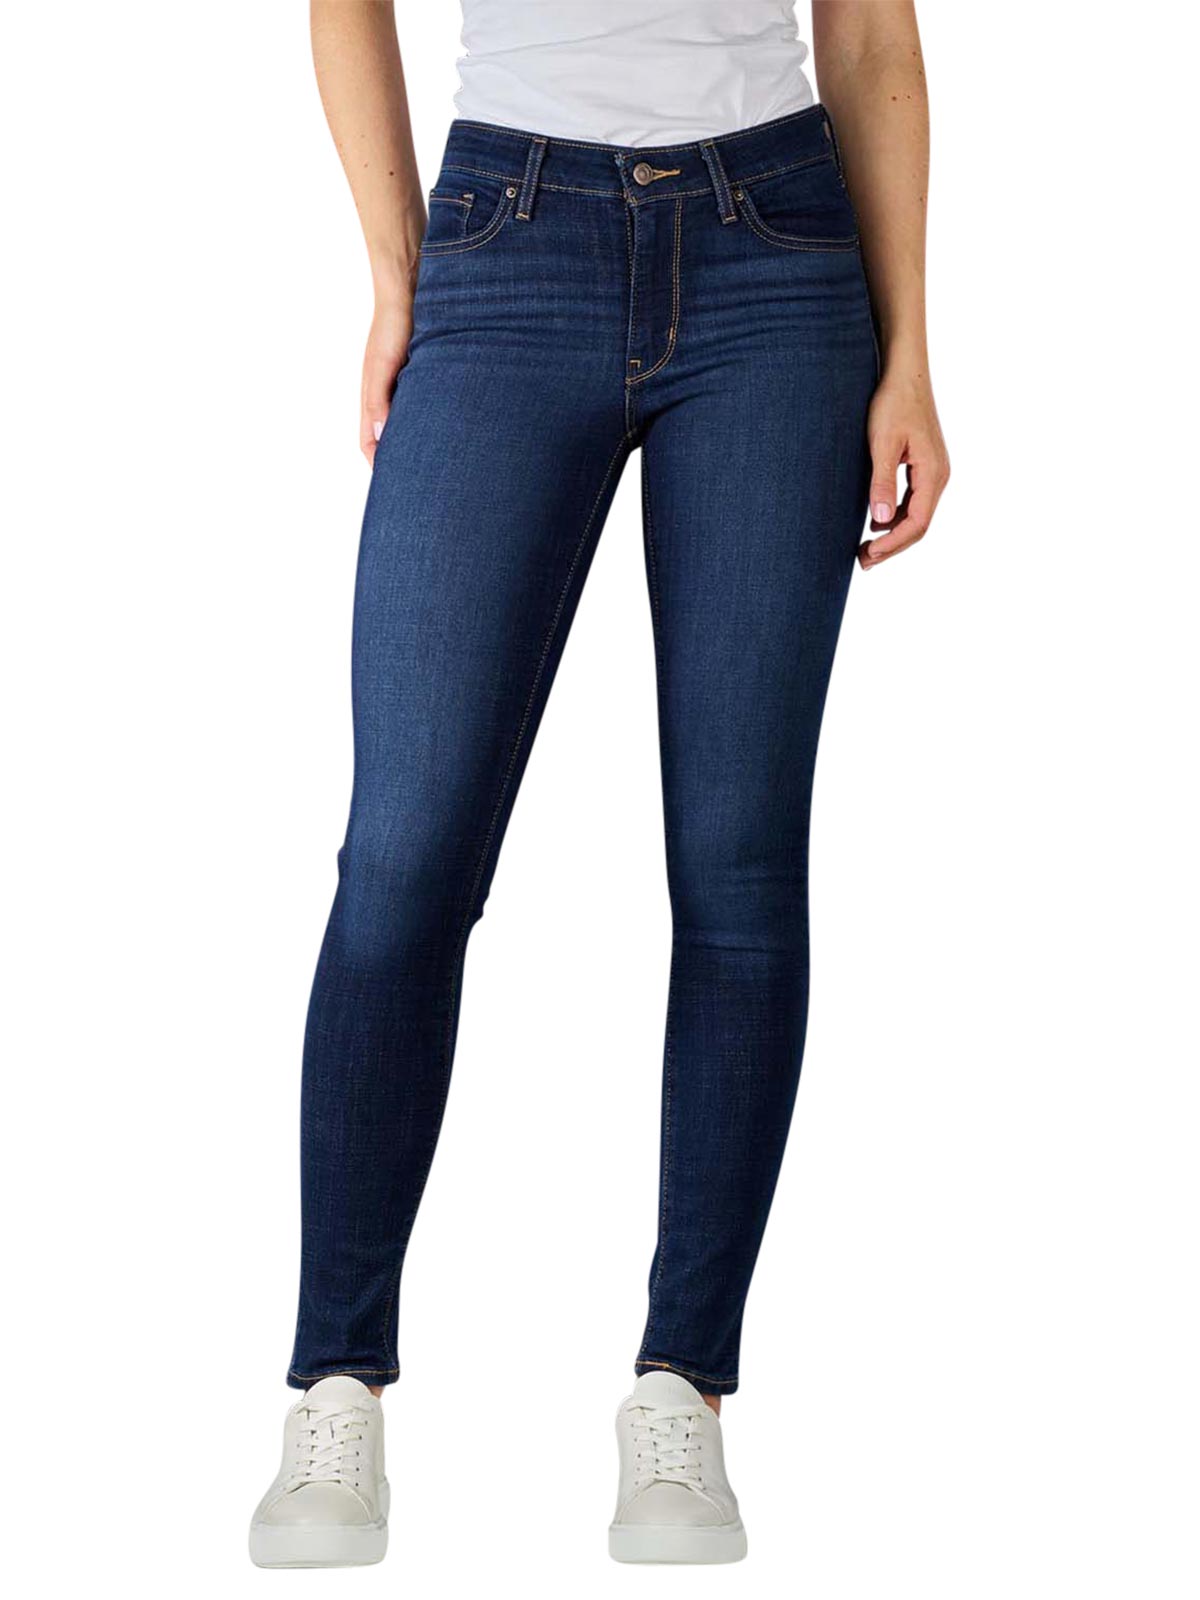 Levi's 711 Jeans Skinny cobalt overboard Levi's Women's Jeans | Free  Shipping on  - SIMPLY LOOK GOOD